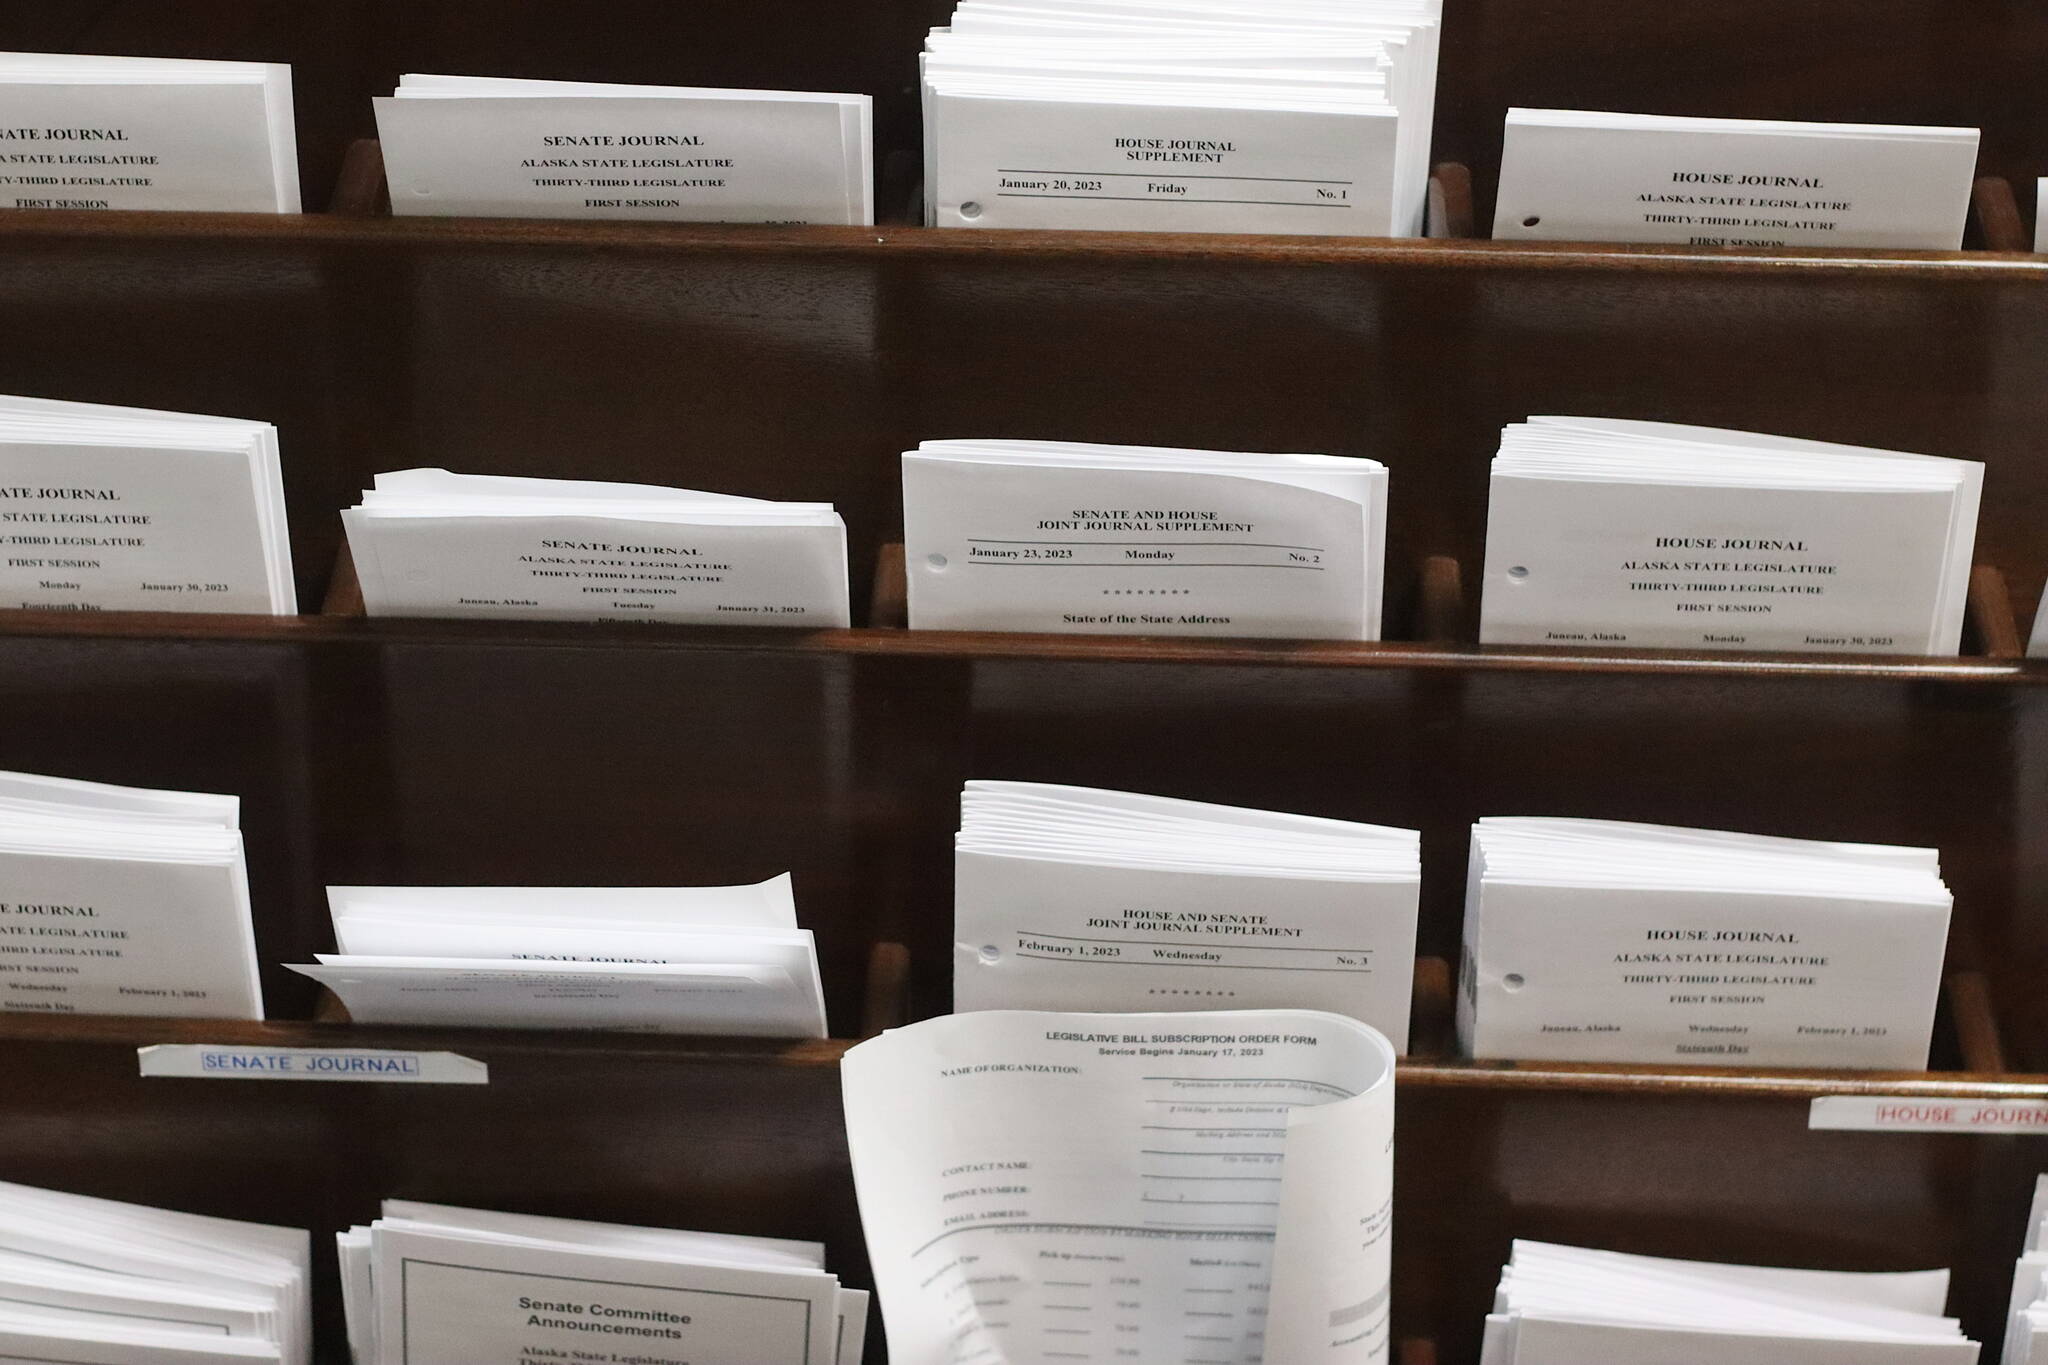 Somewhere lurking in all this paper on the ground floor of the Alaska State Capitol are legislative proposals and declarations seeking to reduce the harmful effects of bureaucracy. (Mark Sabbatini / Juneau Empire)